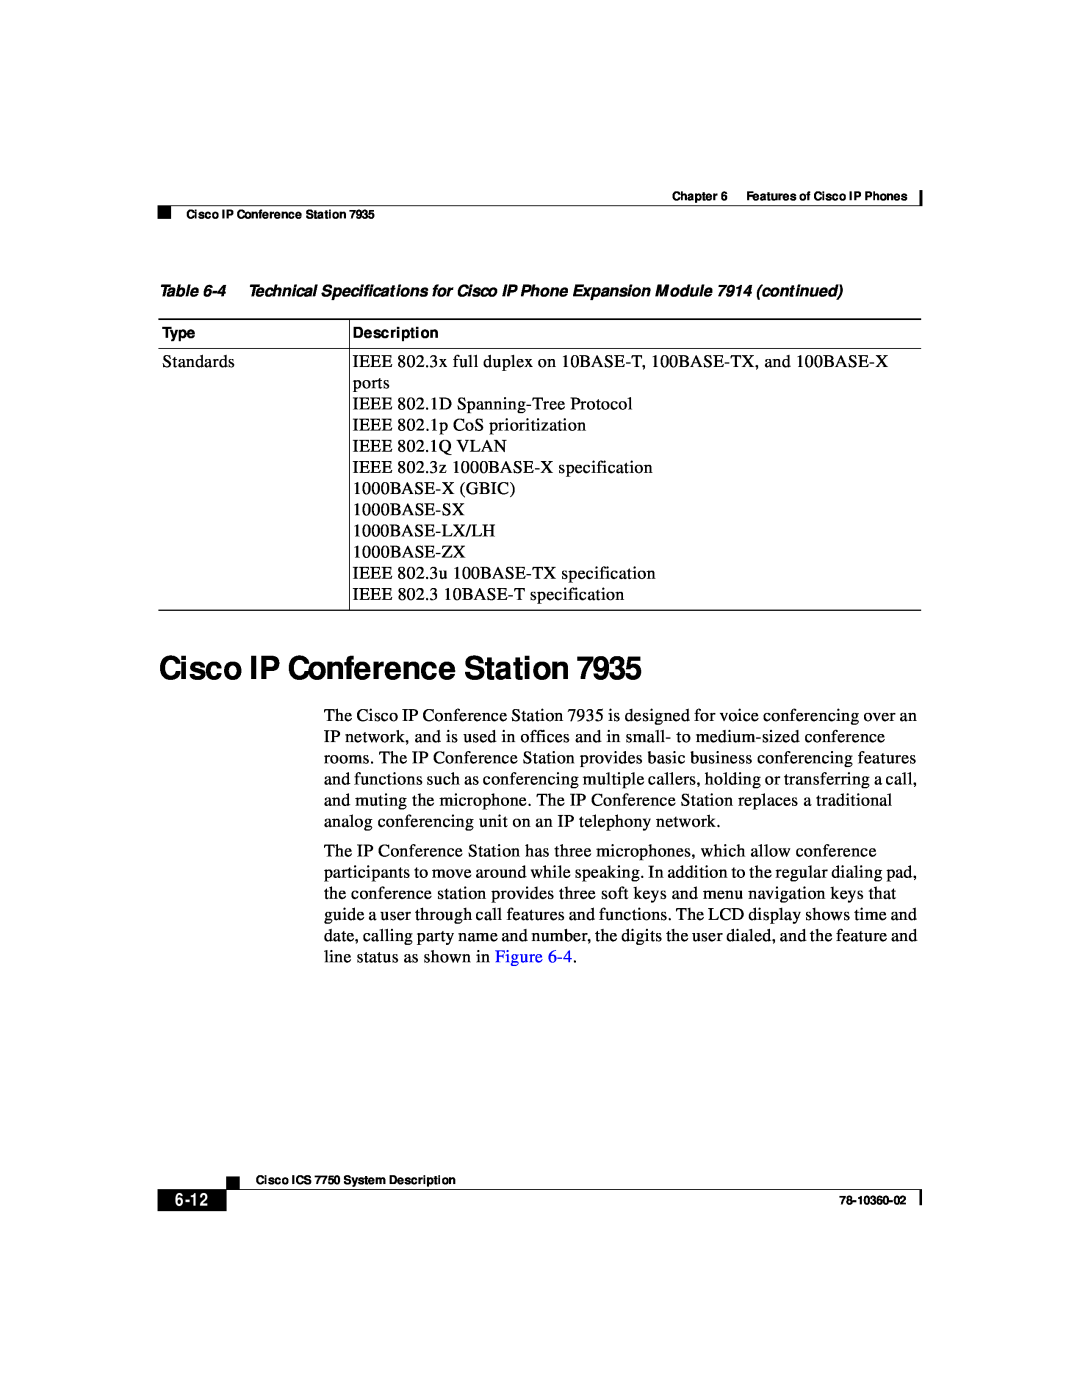 Cisco Systems ICS-7750 manual Cisco IP Conference Station, 6-12 